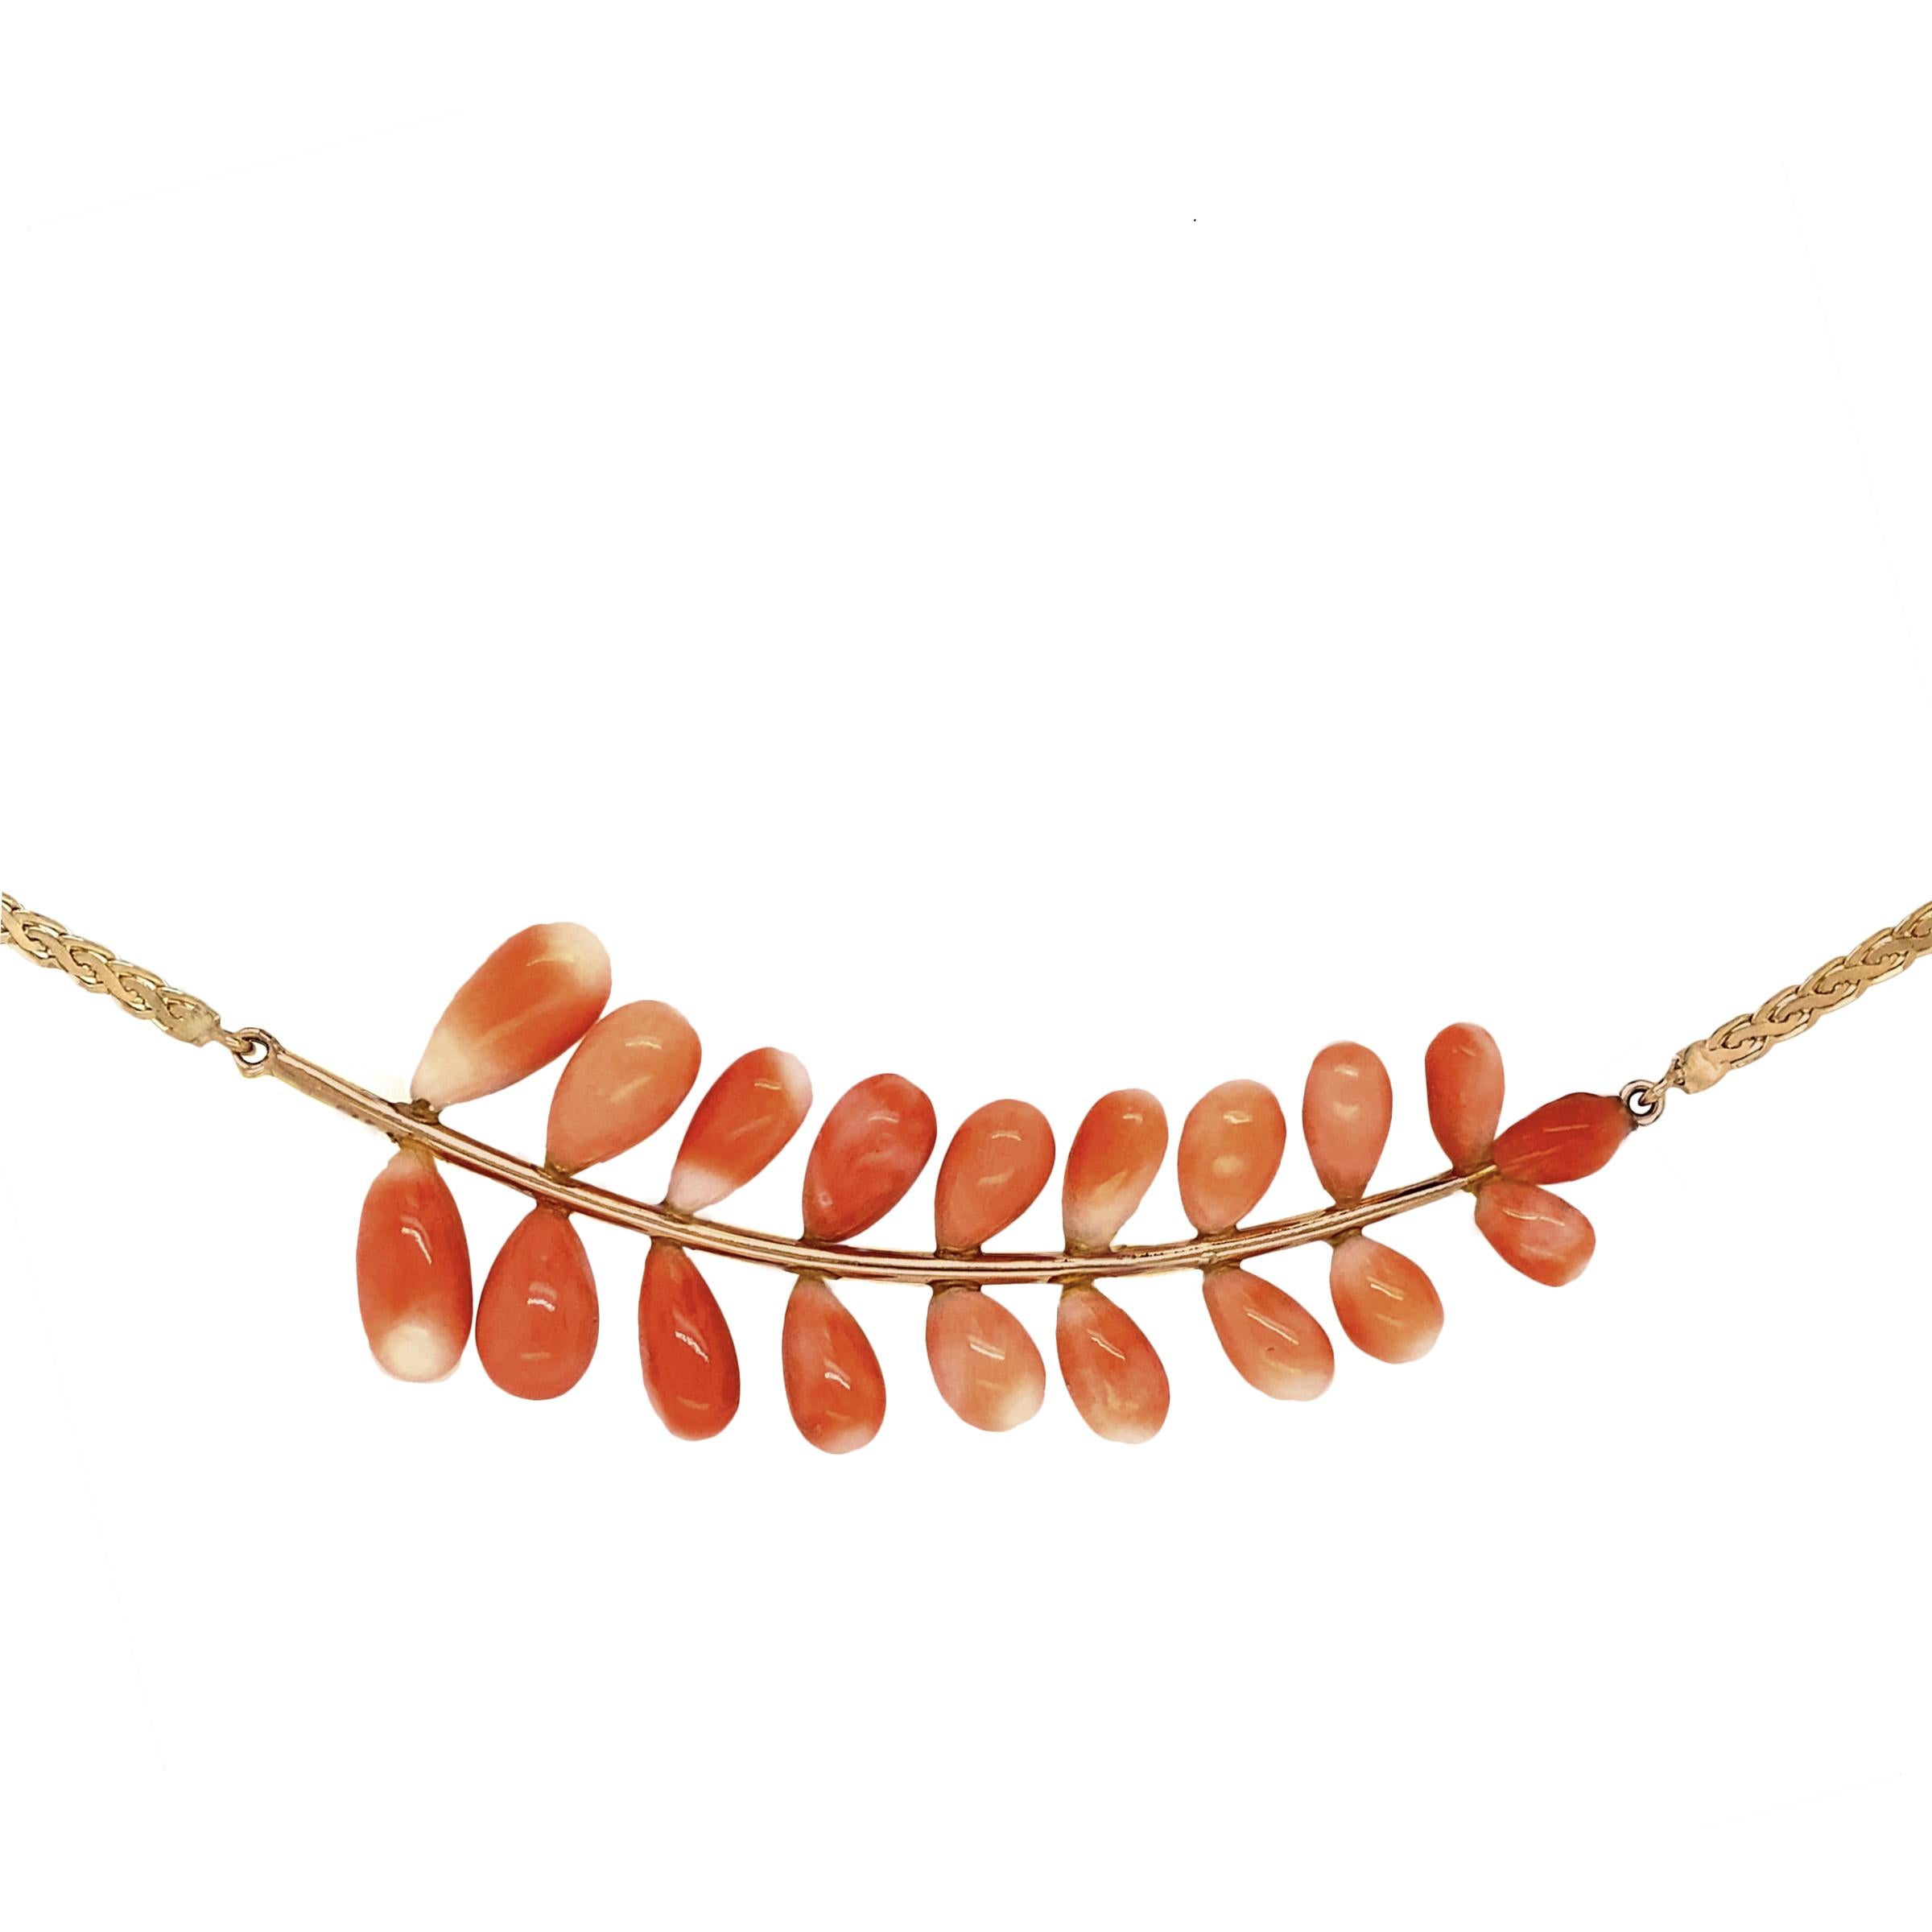 This sprig of richly hued angel skin coral buds was originally a brooch, probably made in the 1960s or early 1970s.  Oriented horizontally, Eytan Brandes recognized an interesting graduated shape and converted the pin to a sexy, one-of-a-kind